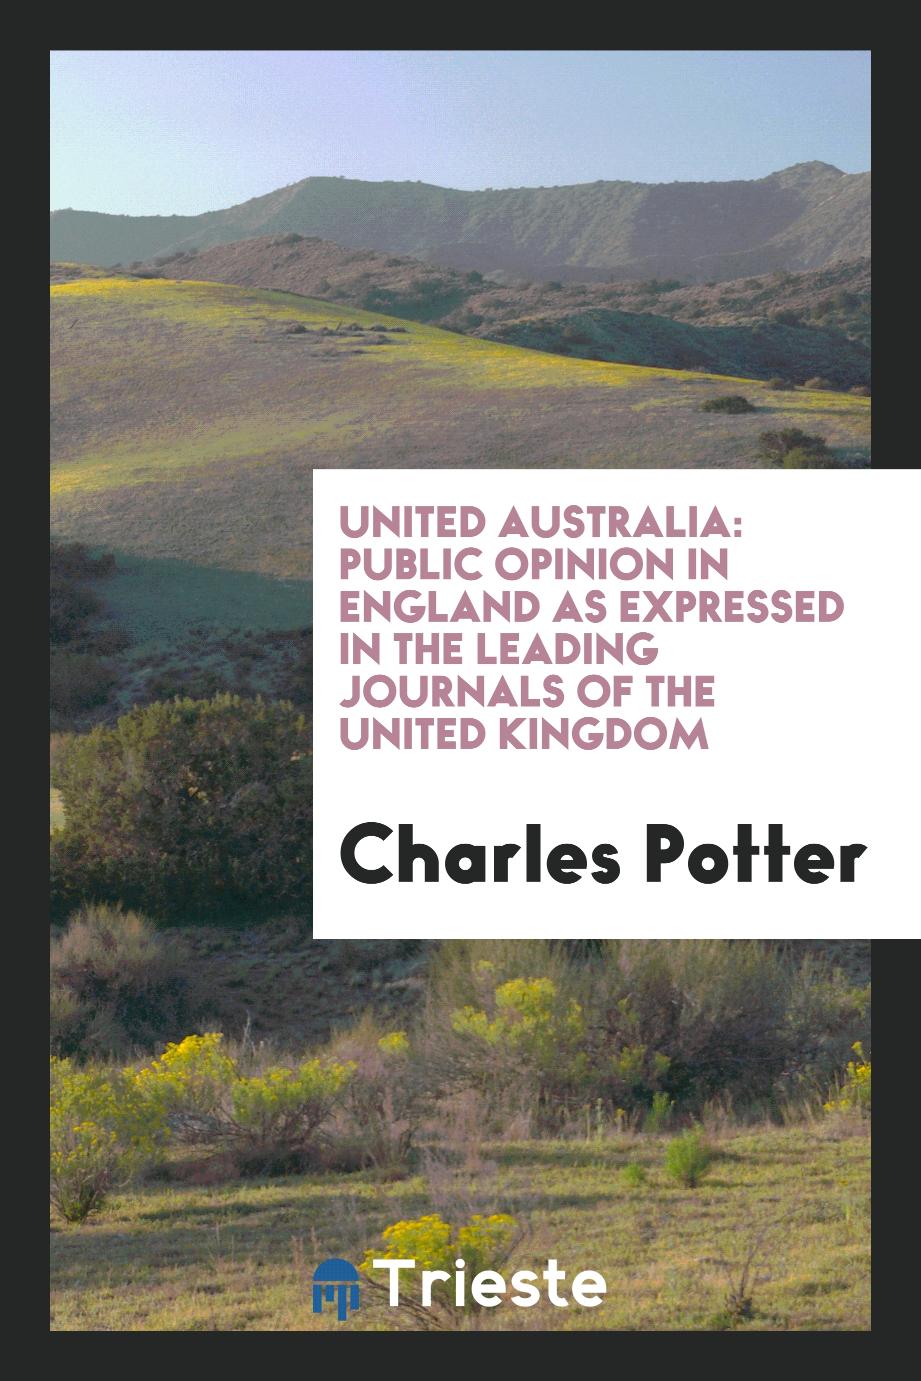 United Australia: Public Opinion in England as Expressed in the Leading Journals of the United Kingdom